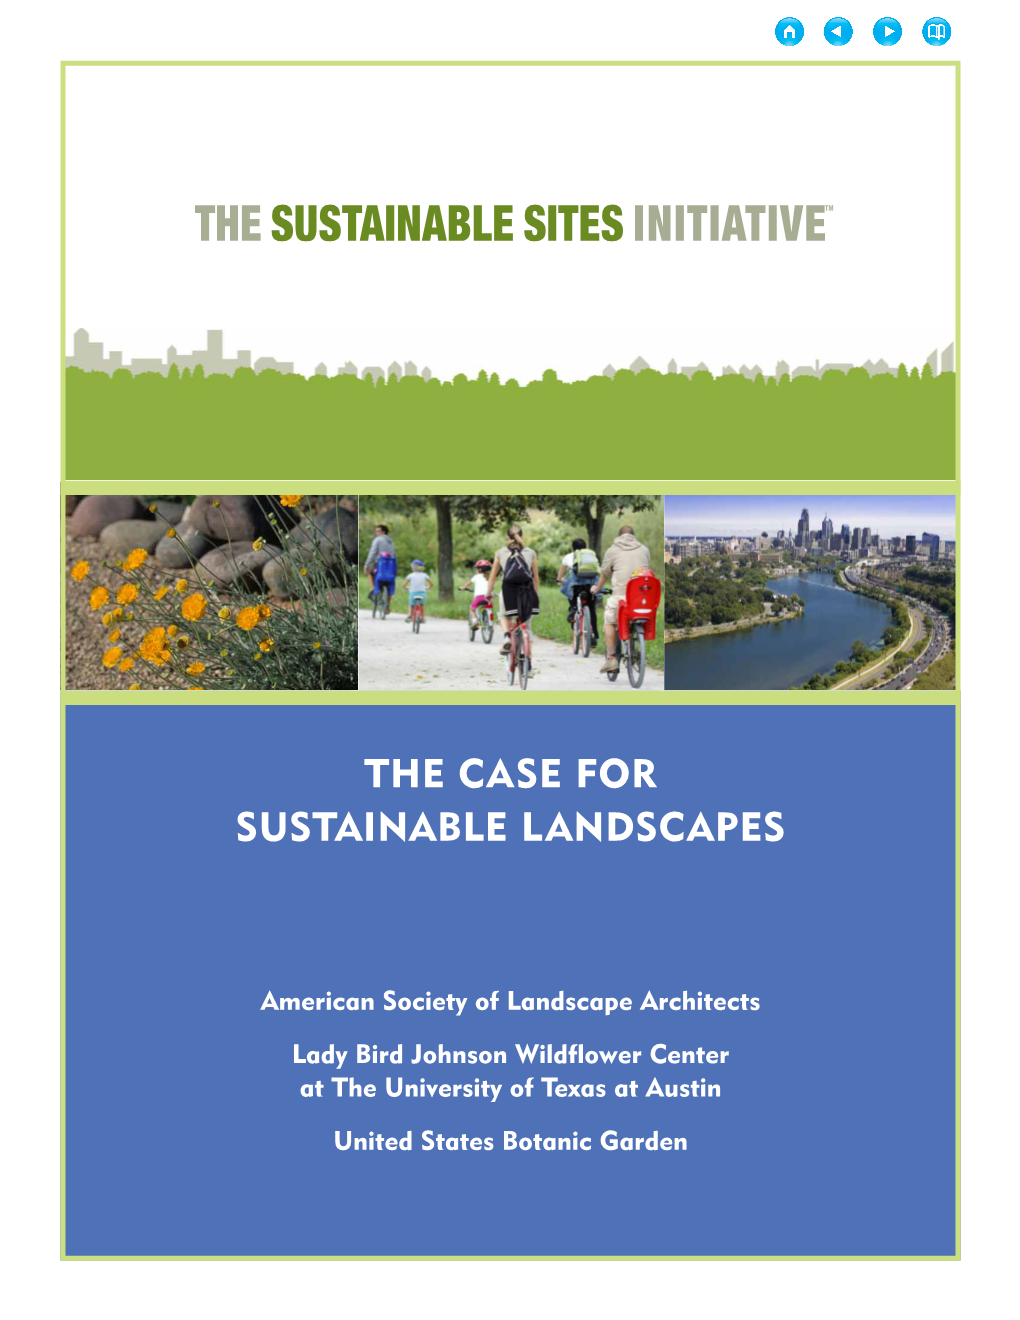 The Case for Sustainable Landscapes